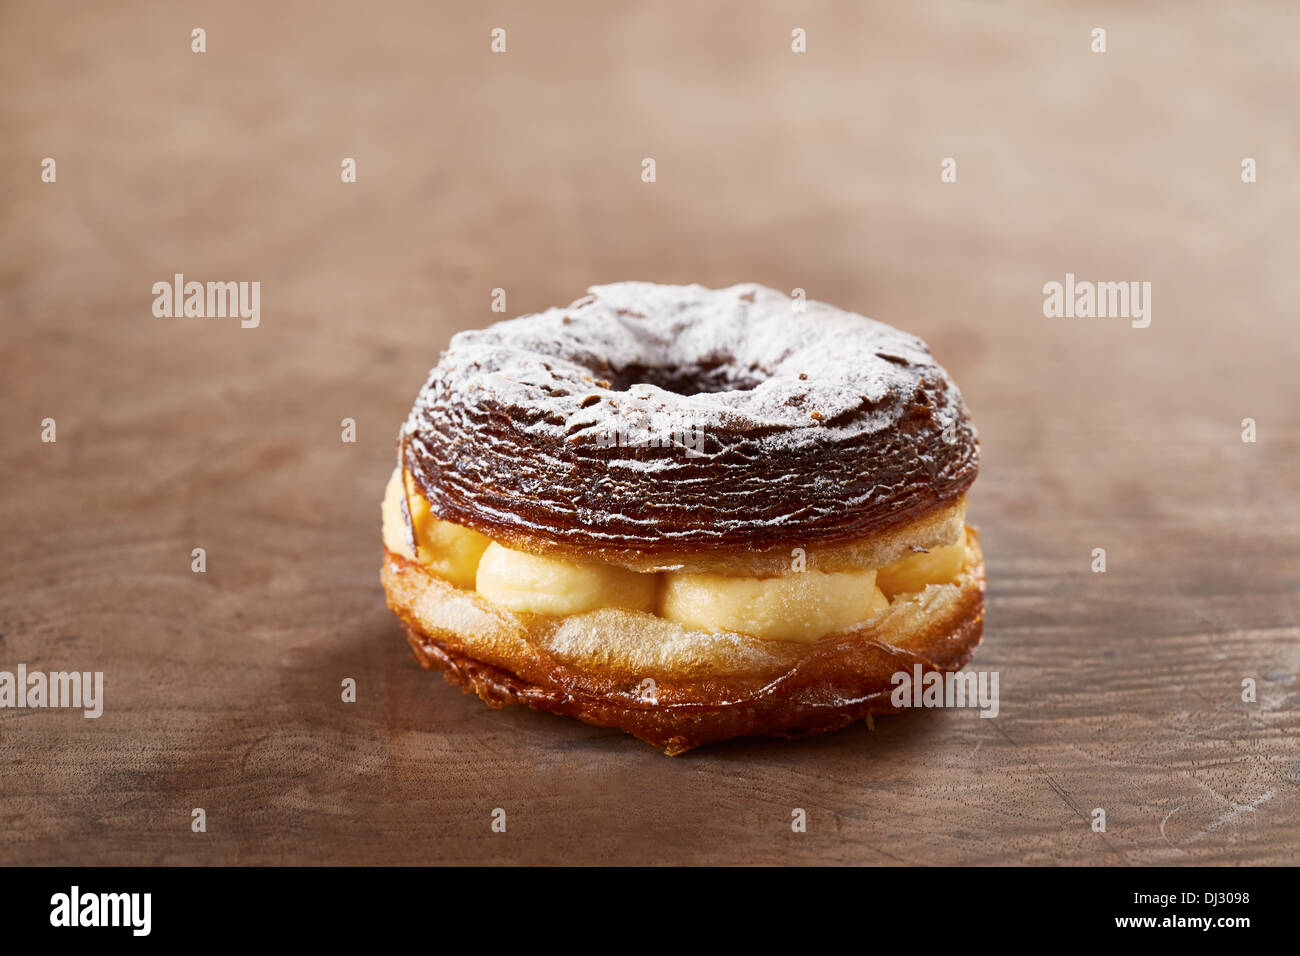 Cream stuffed croissant and doughnut mixture on wooden table Stock Photo